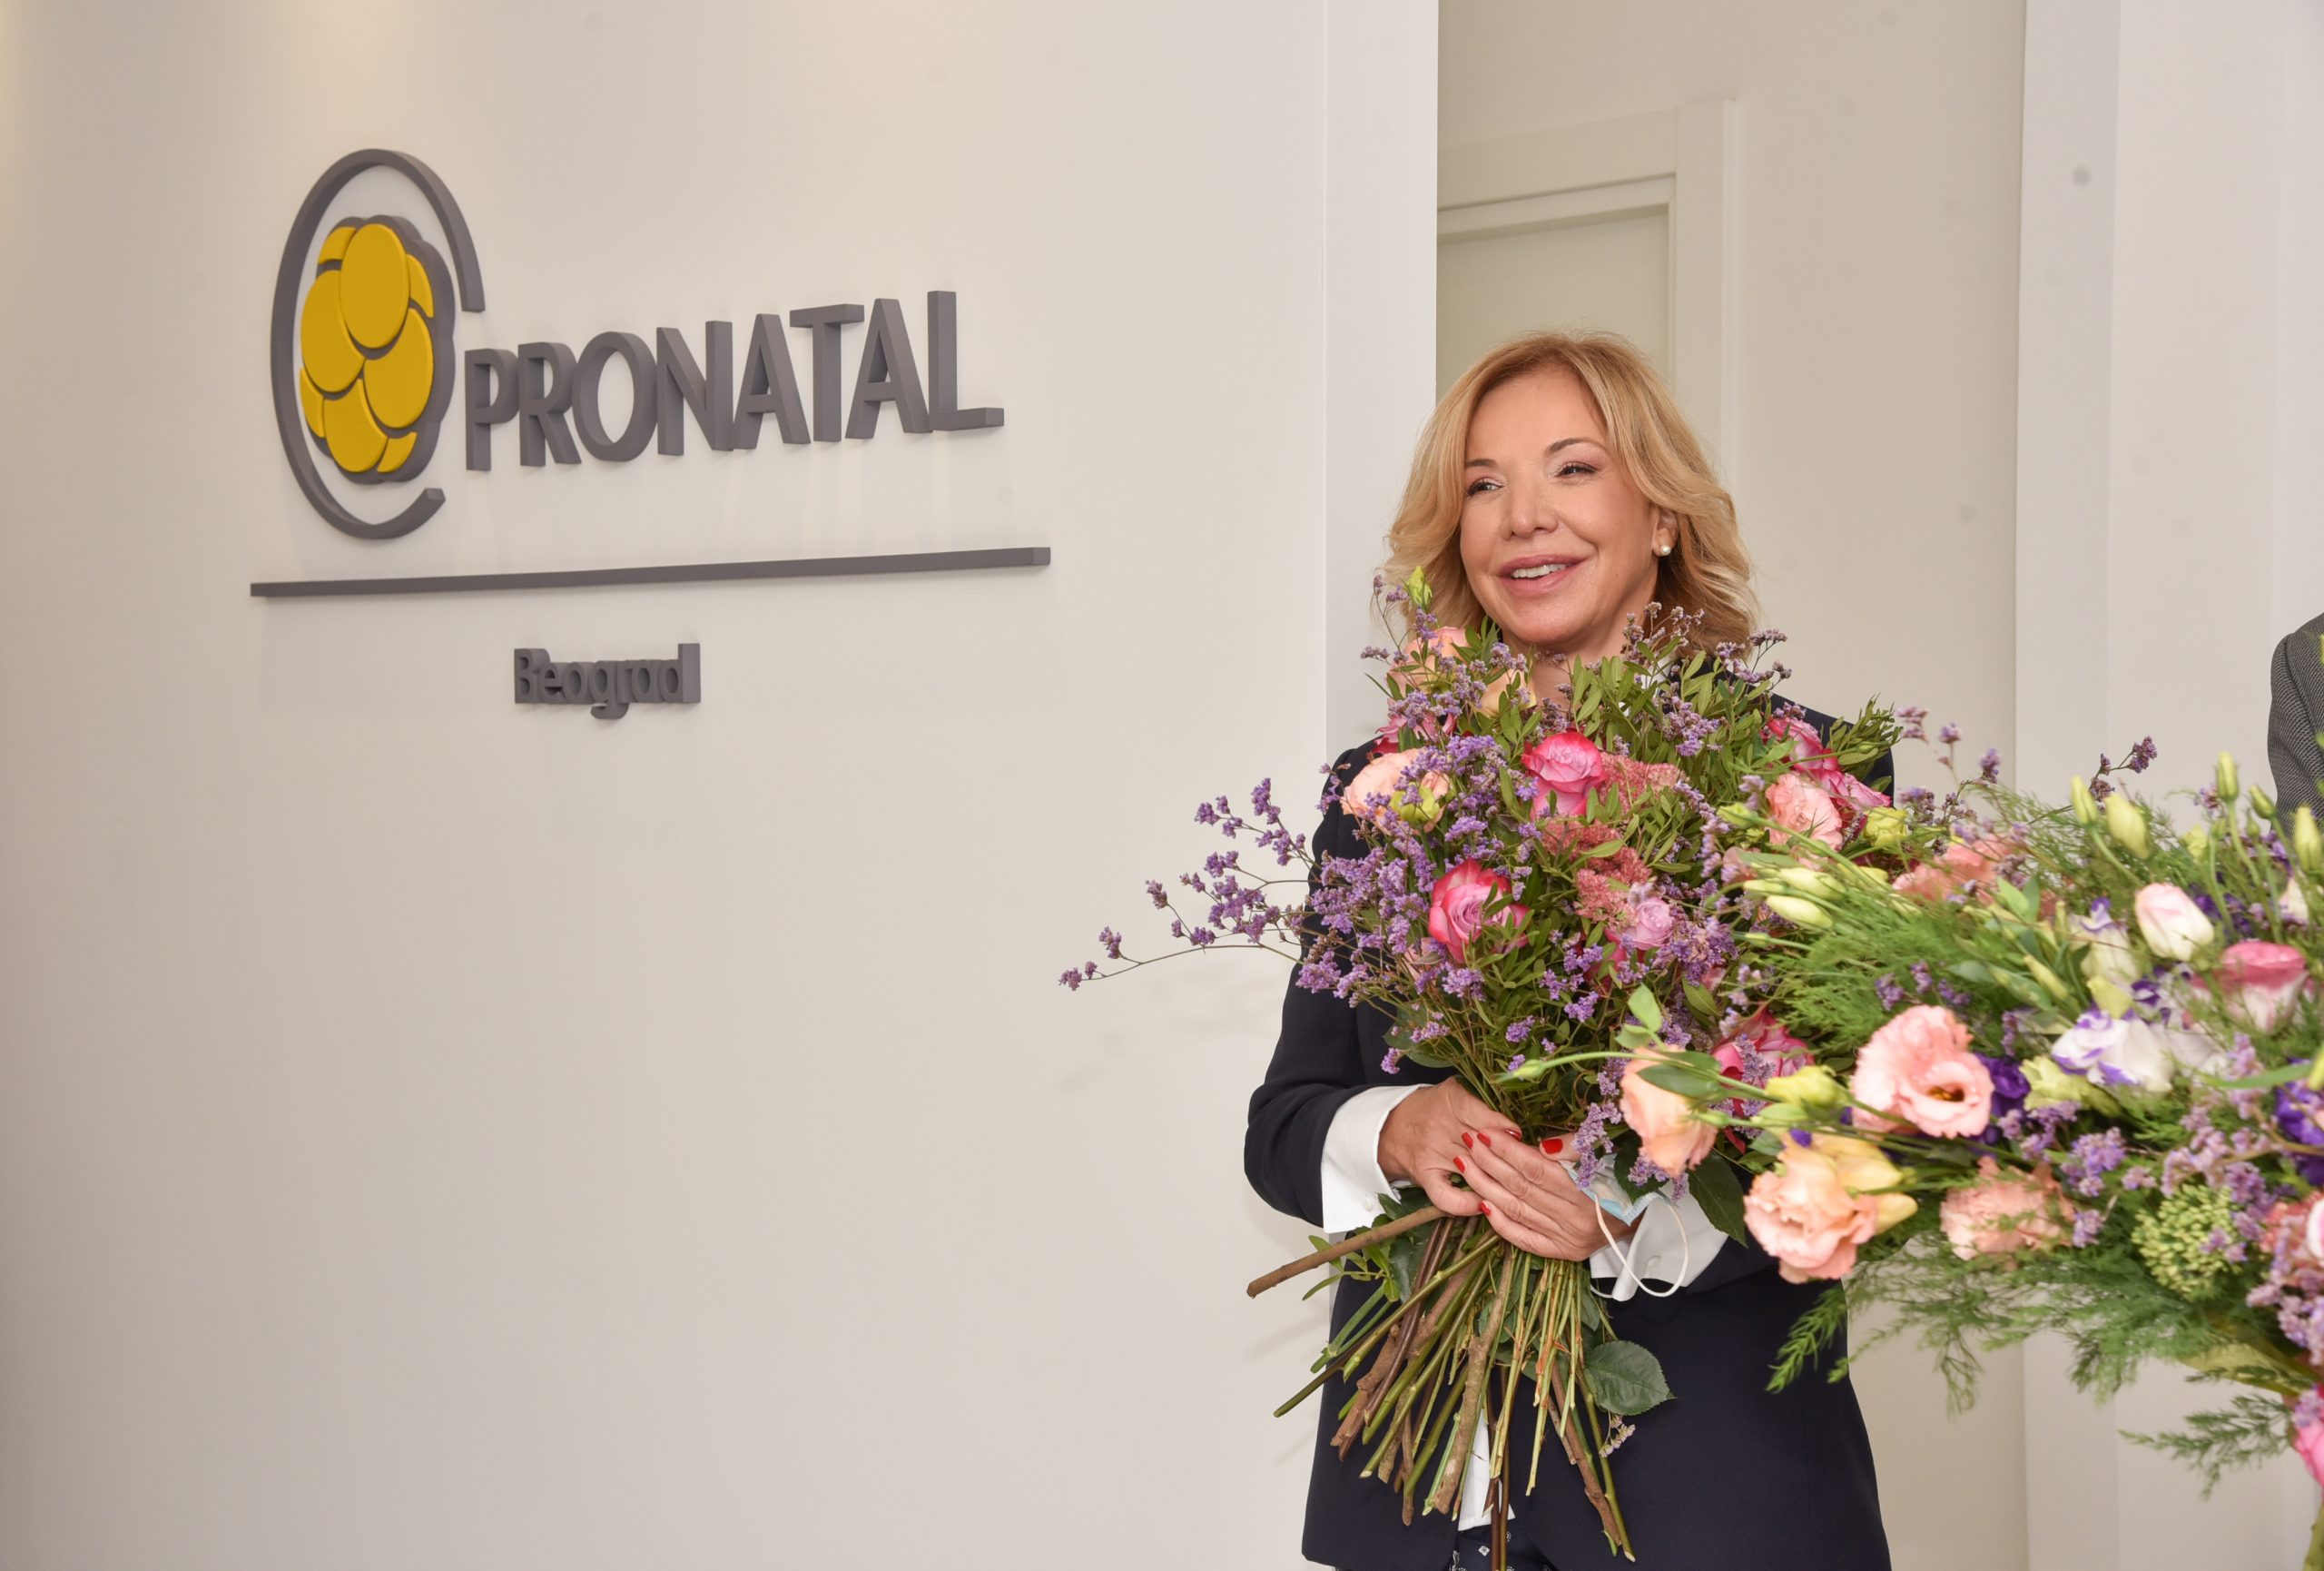 The power of Czech reproductive medicine: We were at the opening of the Special Gynecological Hospital "Pronatal Belgrade" thumbnail